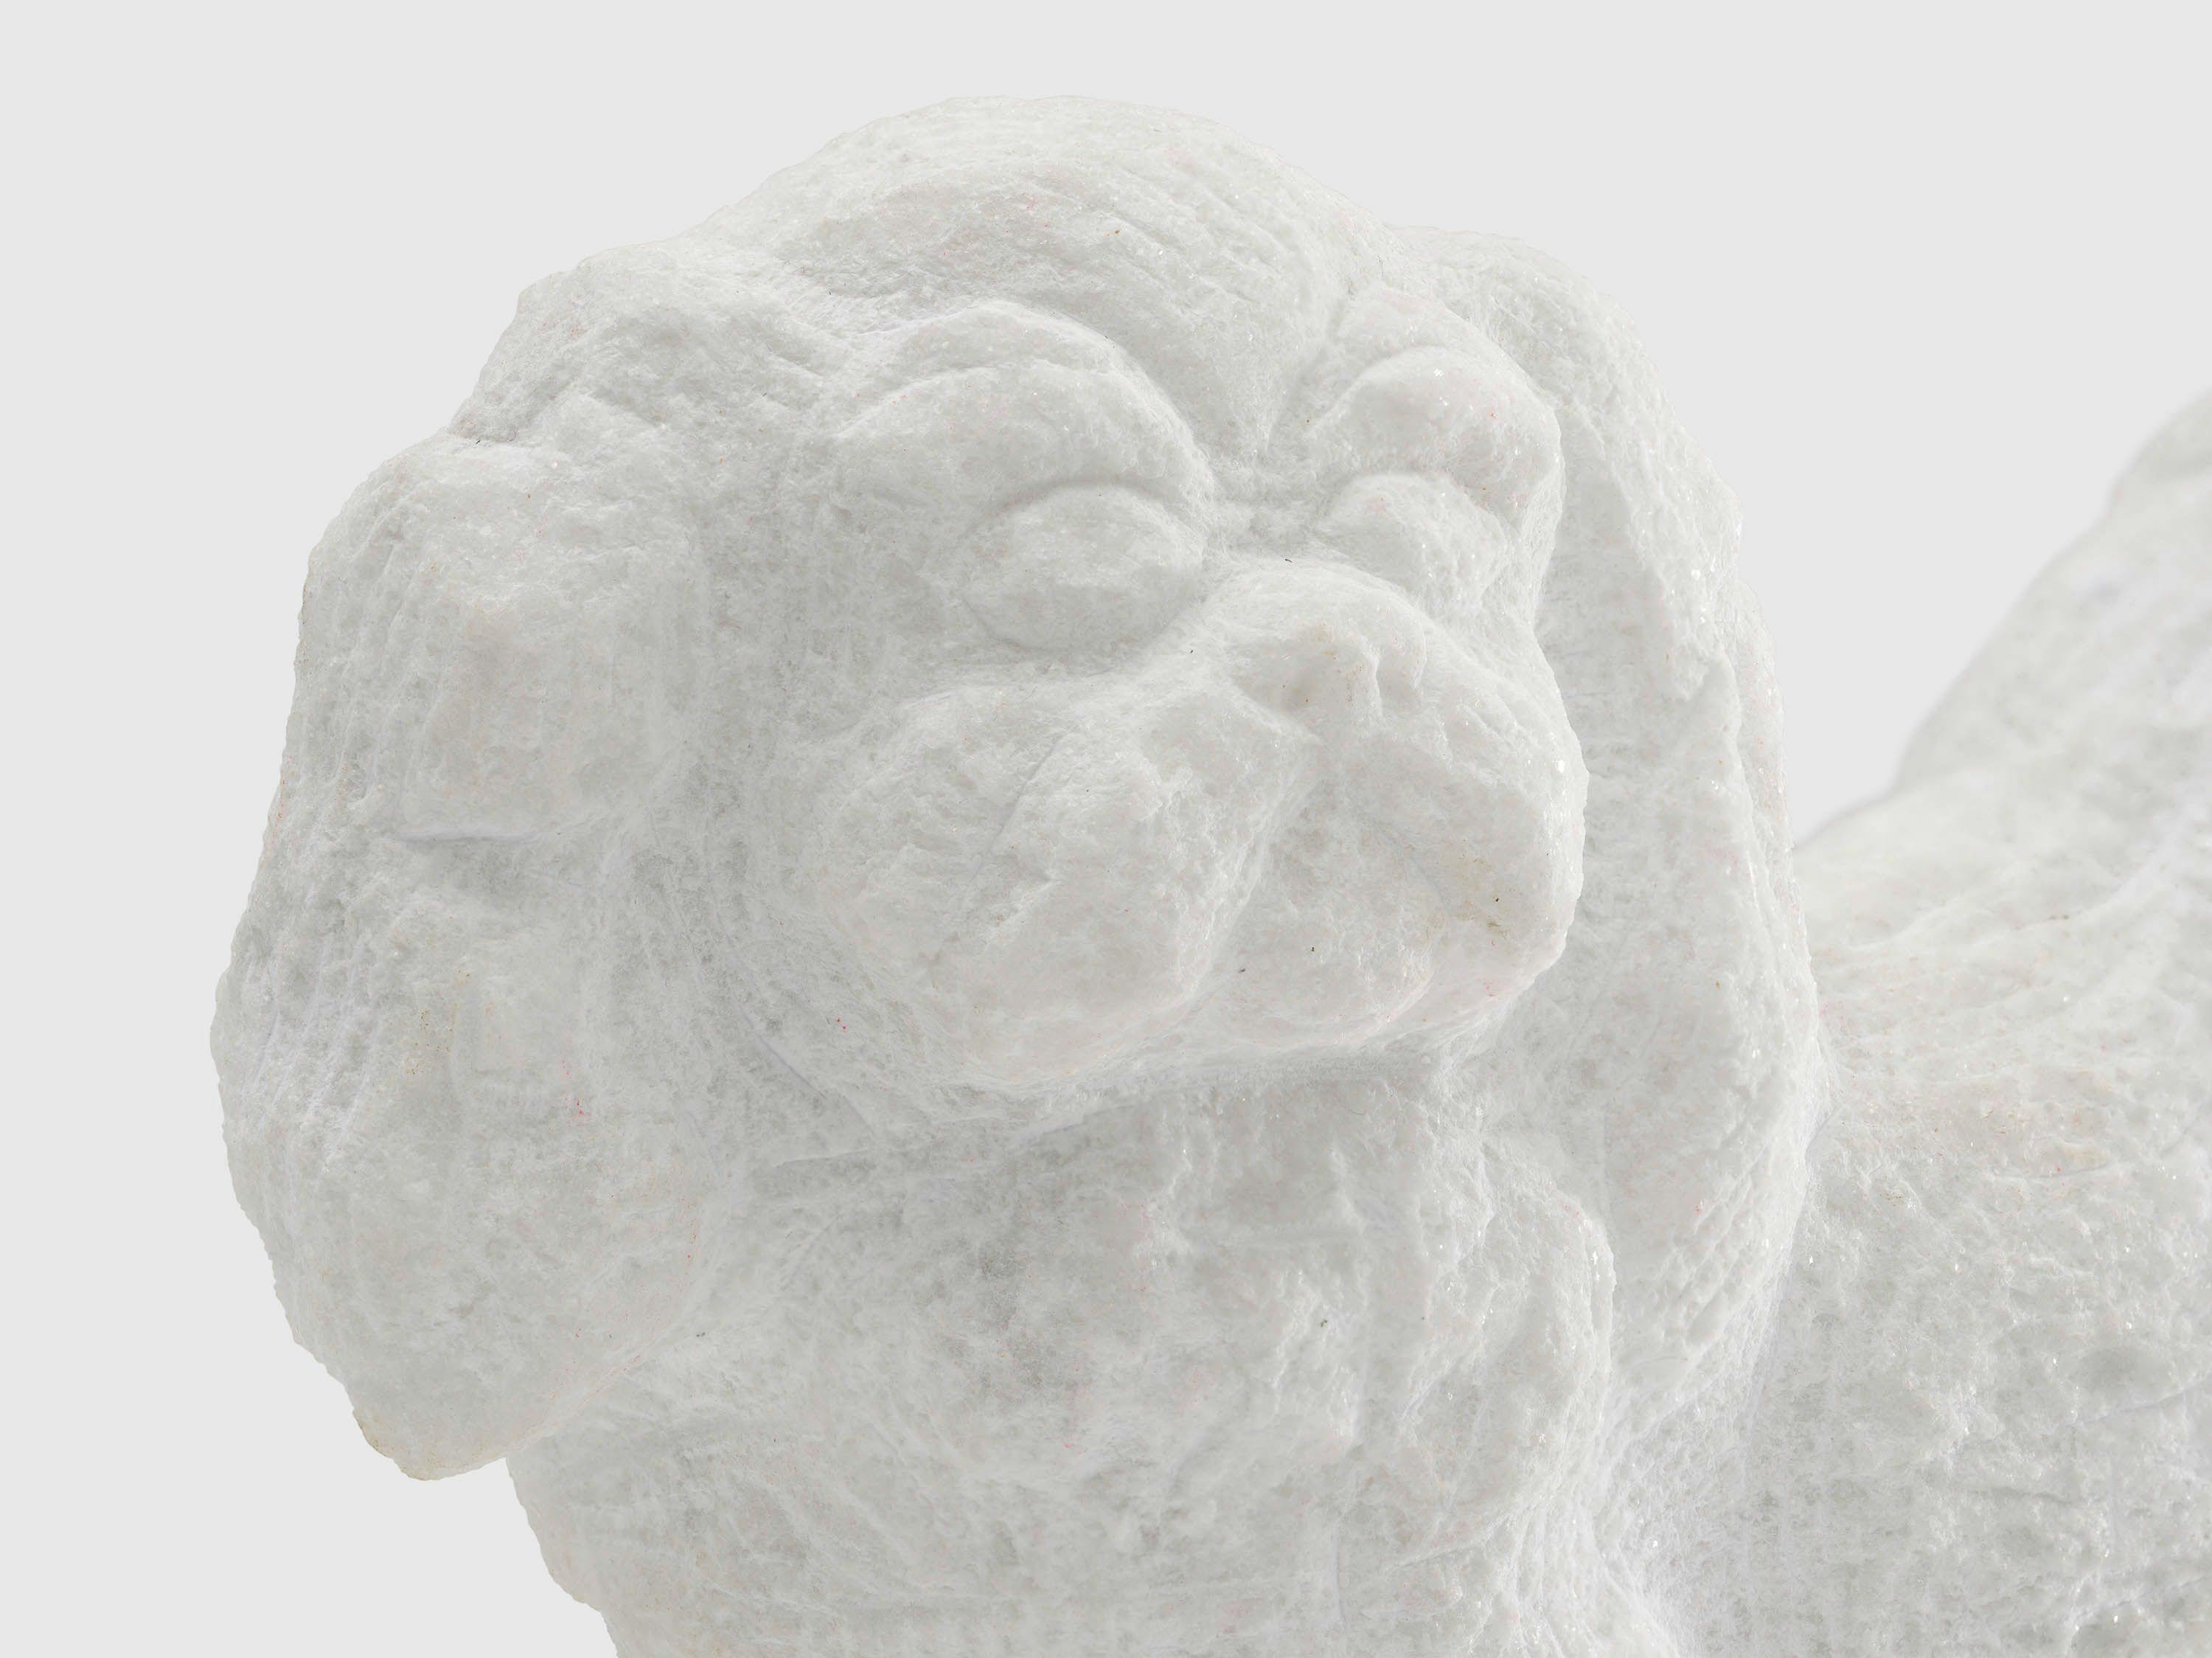 A detail from a marble sculpture by Declan Kearns, titled Poochie, dated 2021.